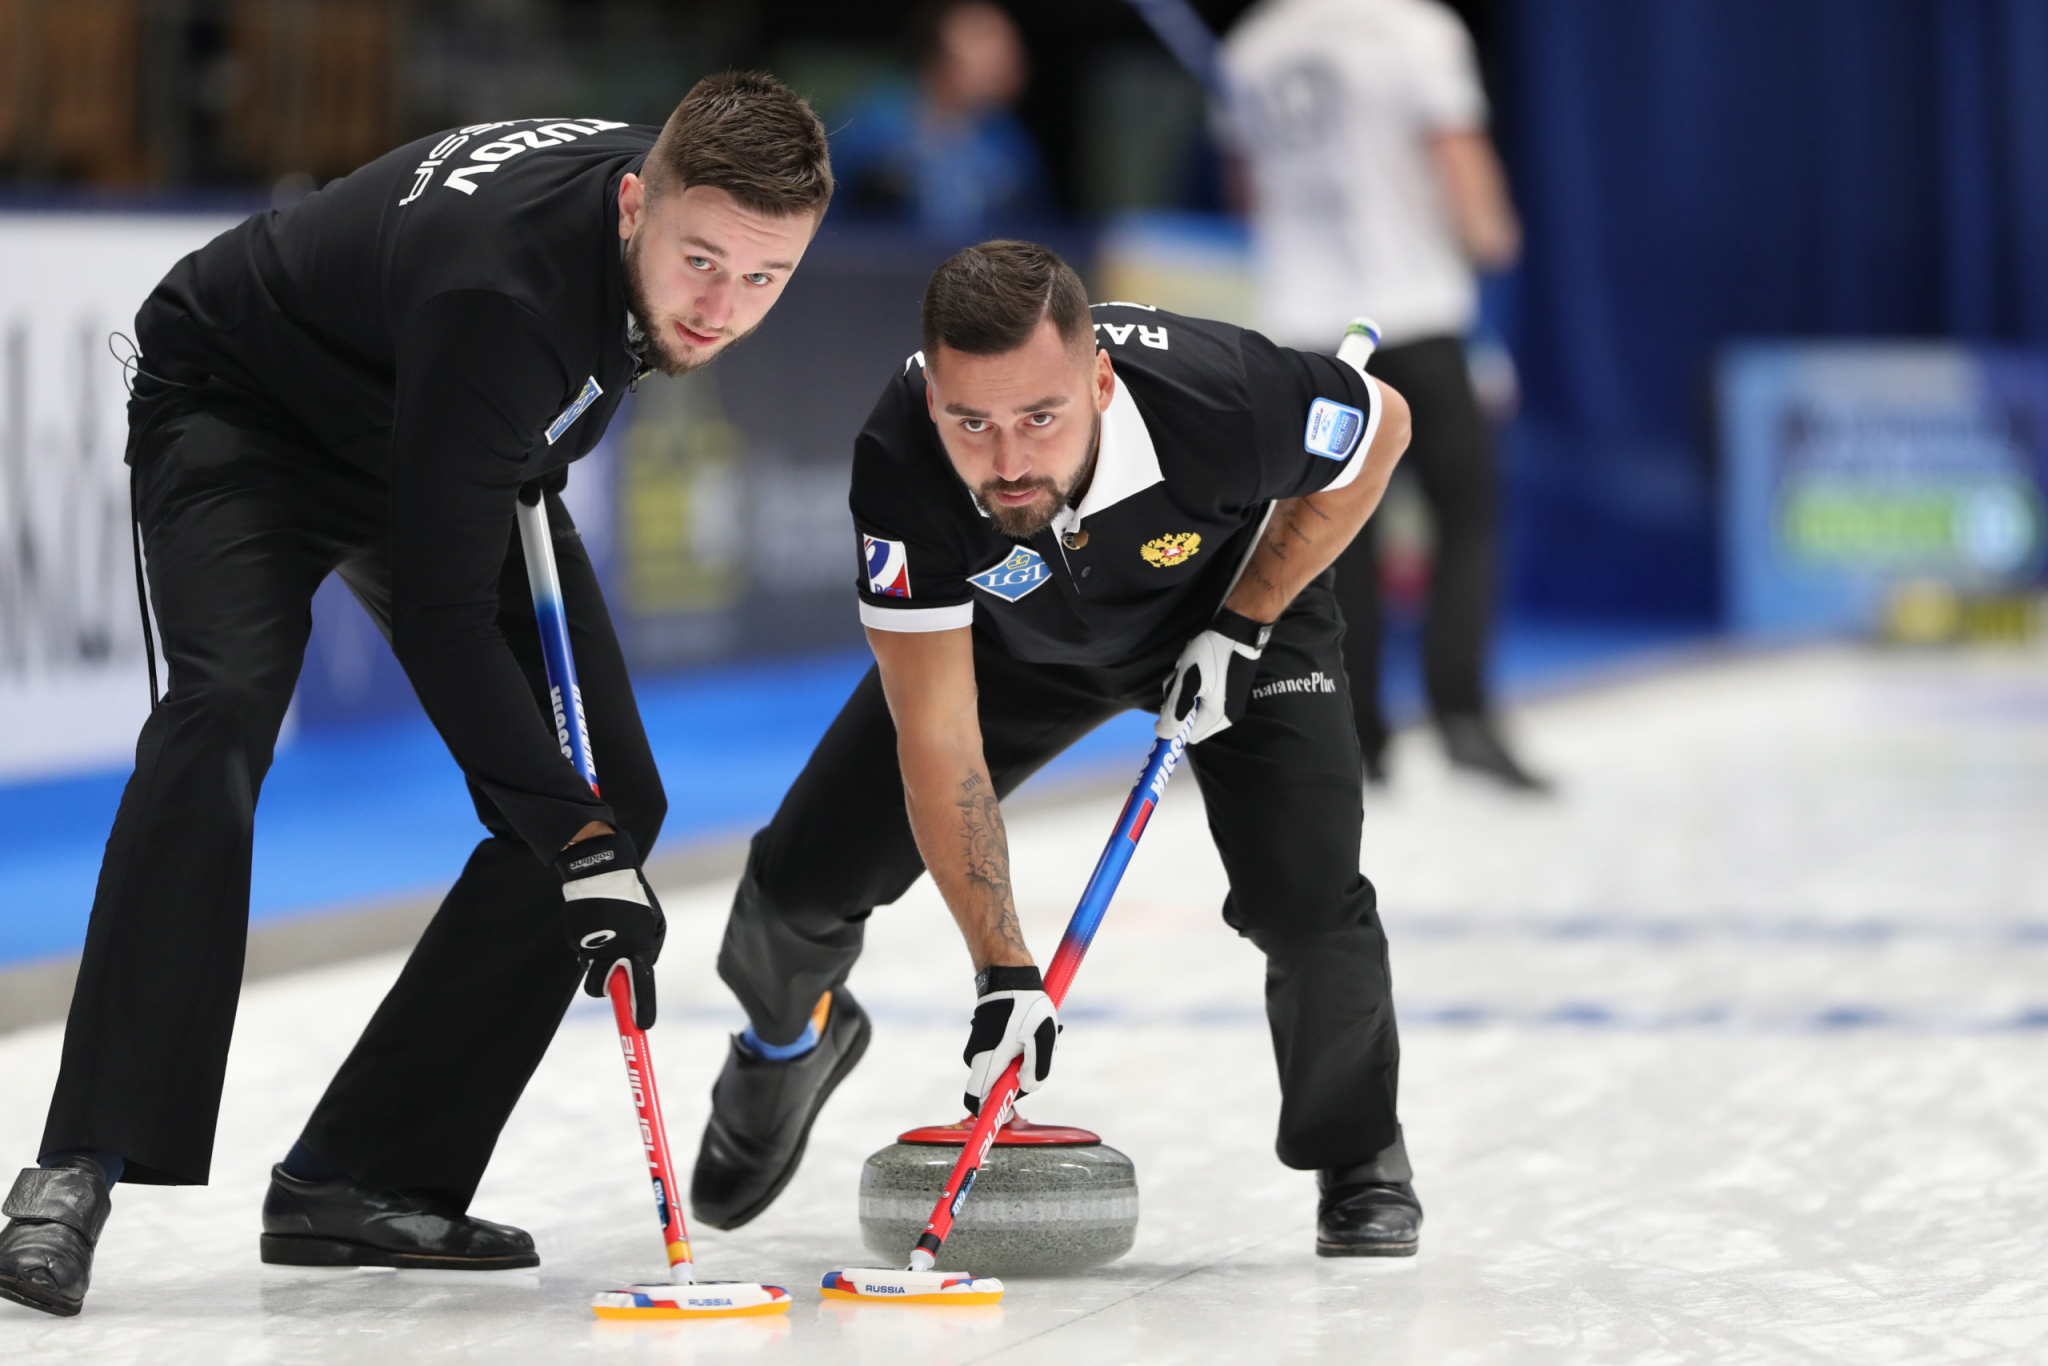 Defending champions Scotland suffer first defeat at European Curling Championships